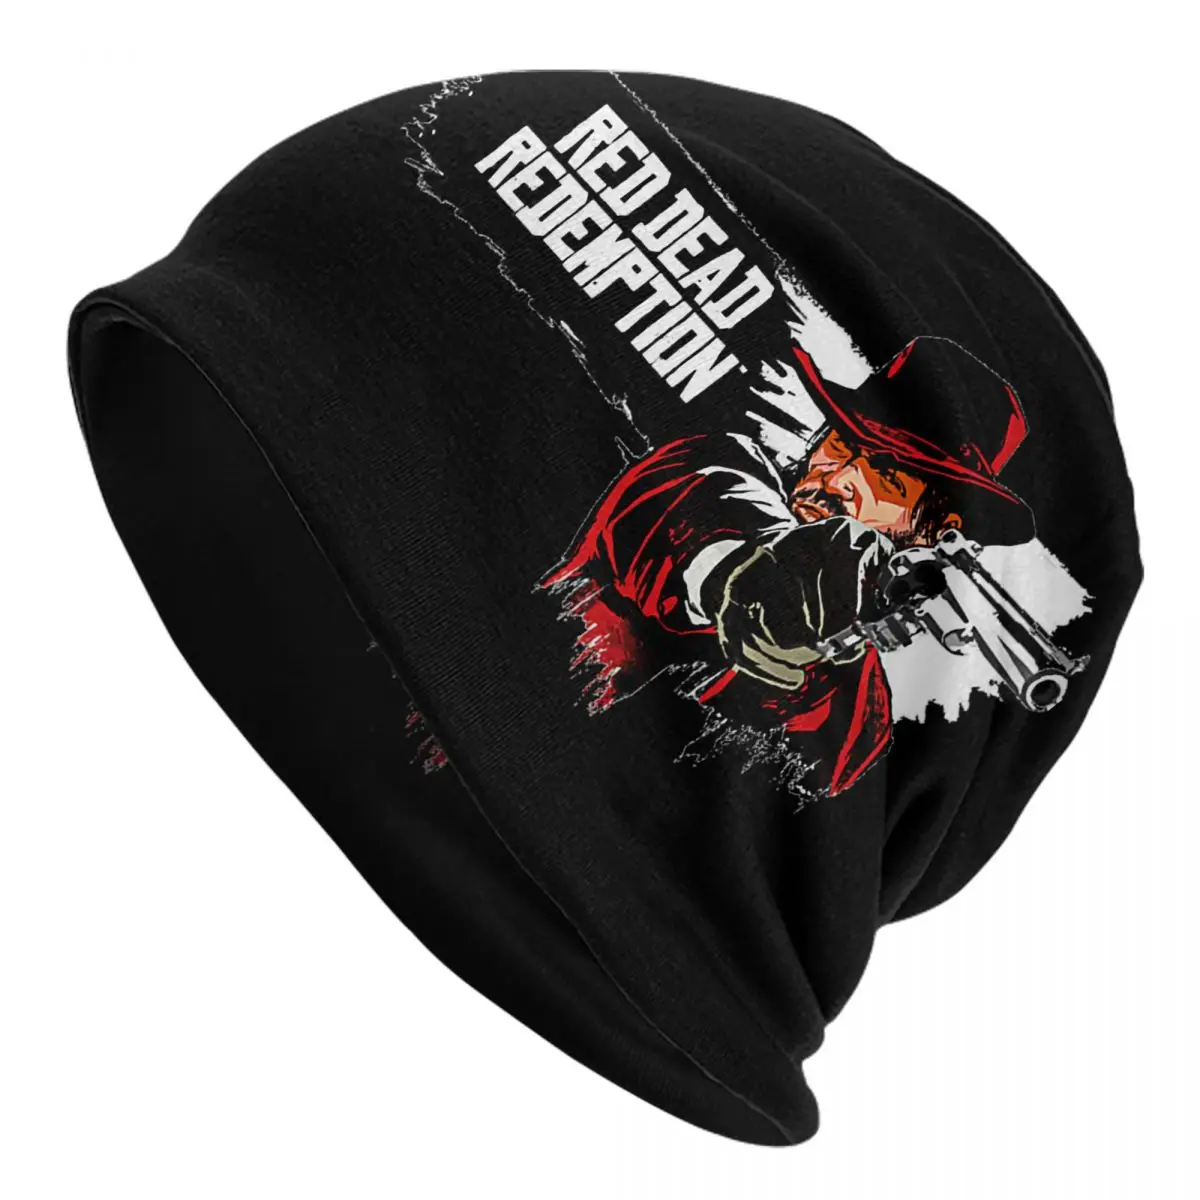 Grand Theft Auto Adult Men's Women's Knit Hat Keep warm winter Funny knitted hat